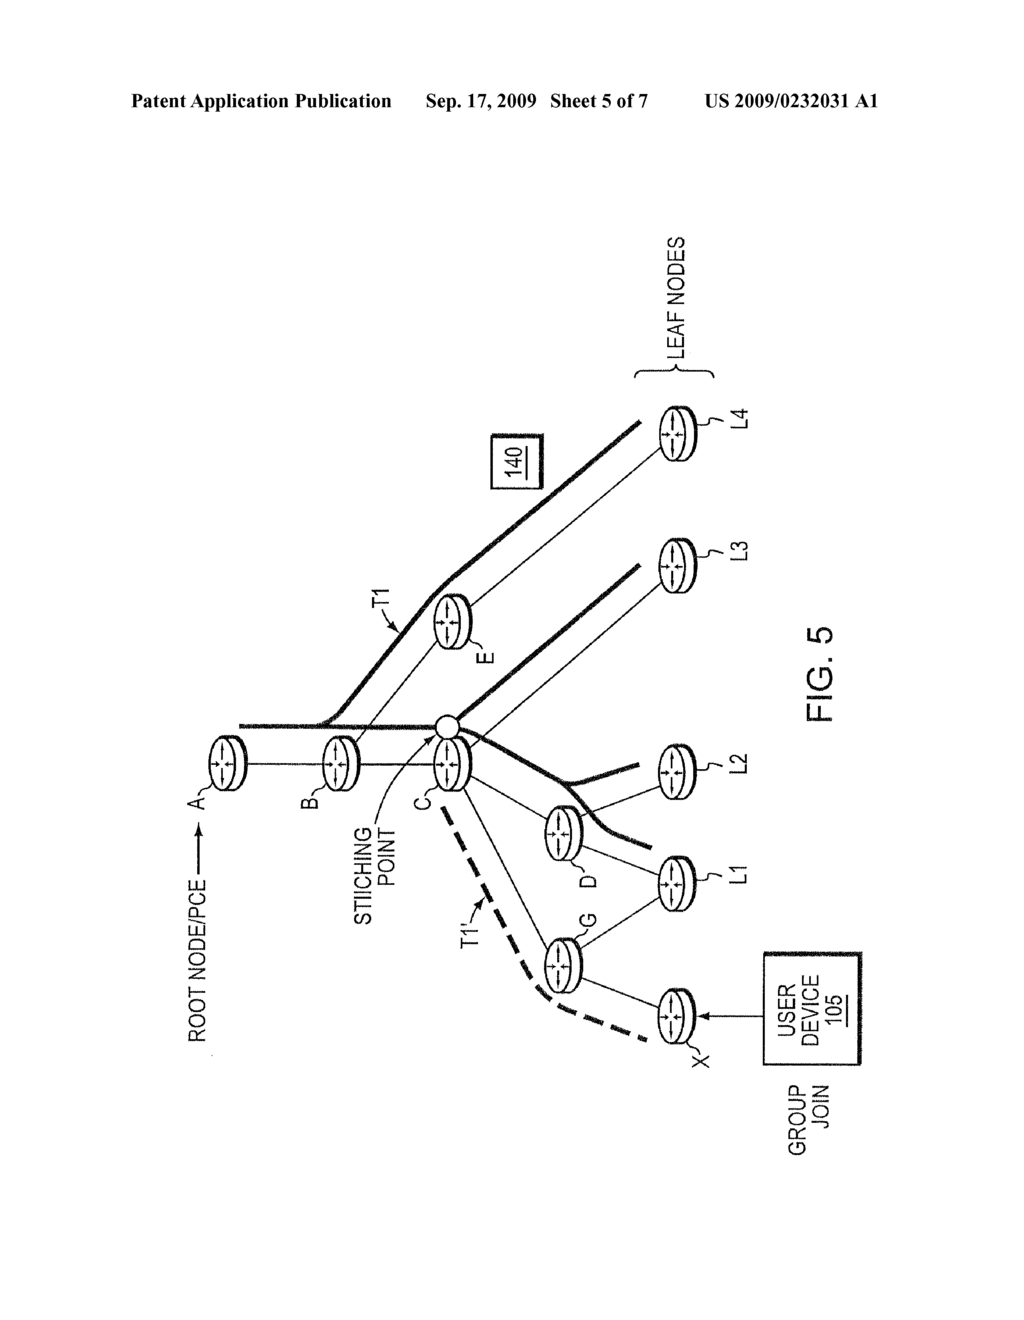 RECEIVER-BASED CONSTRUCTION OF POINT-TO-MULTIPOINT TREES USING PATH COMPUTATION ELEMENTS IN A COMPUTER NETWORK - diagram, schematic, and image 06